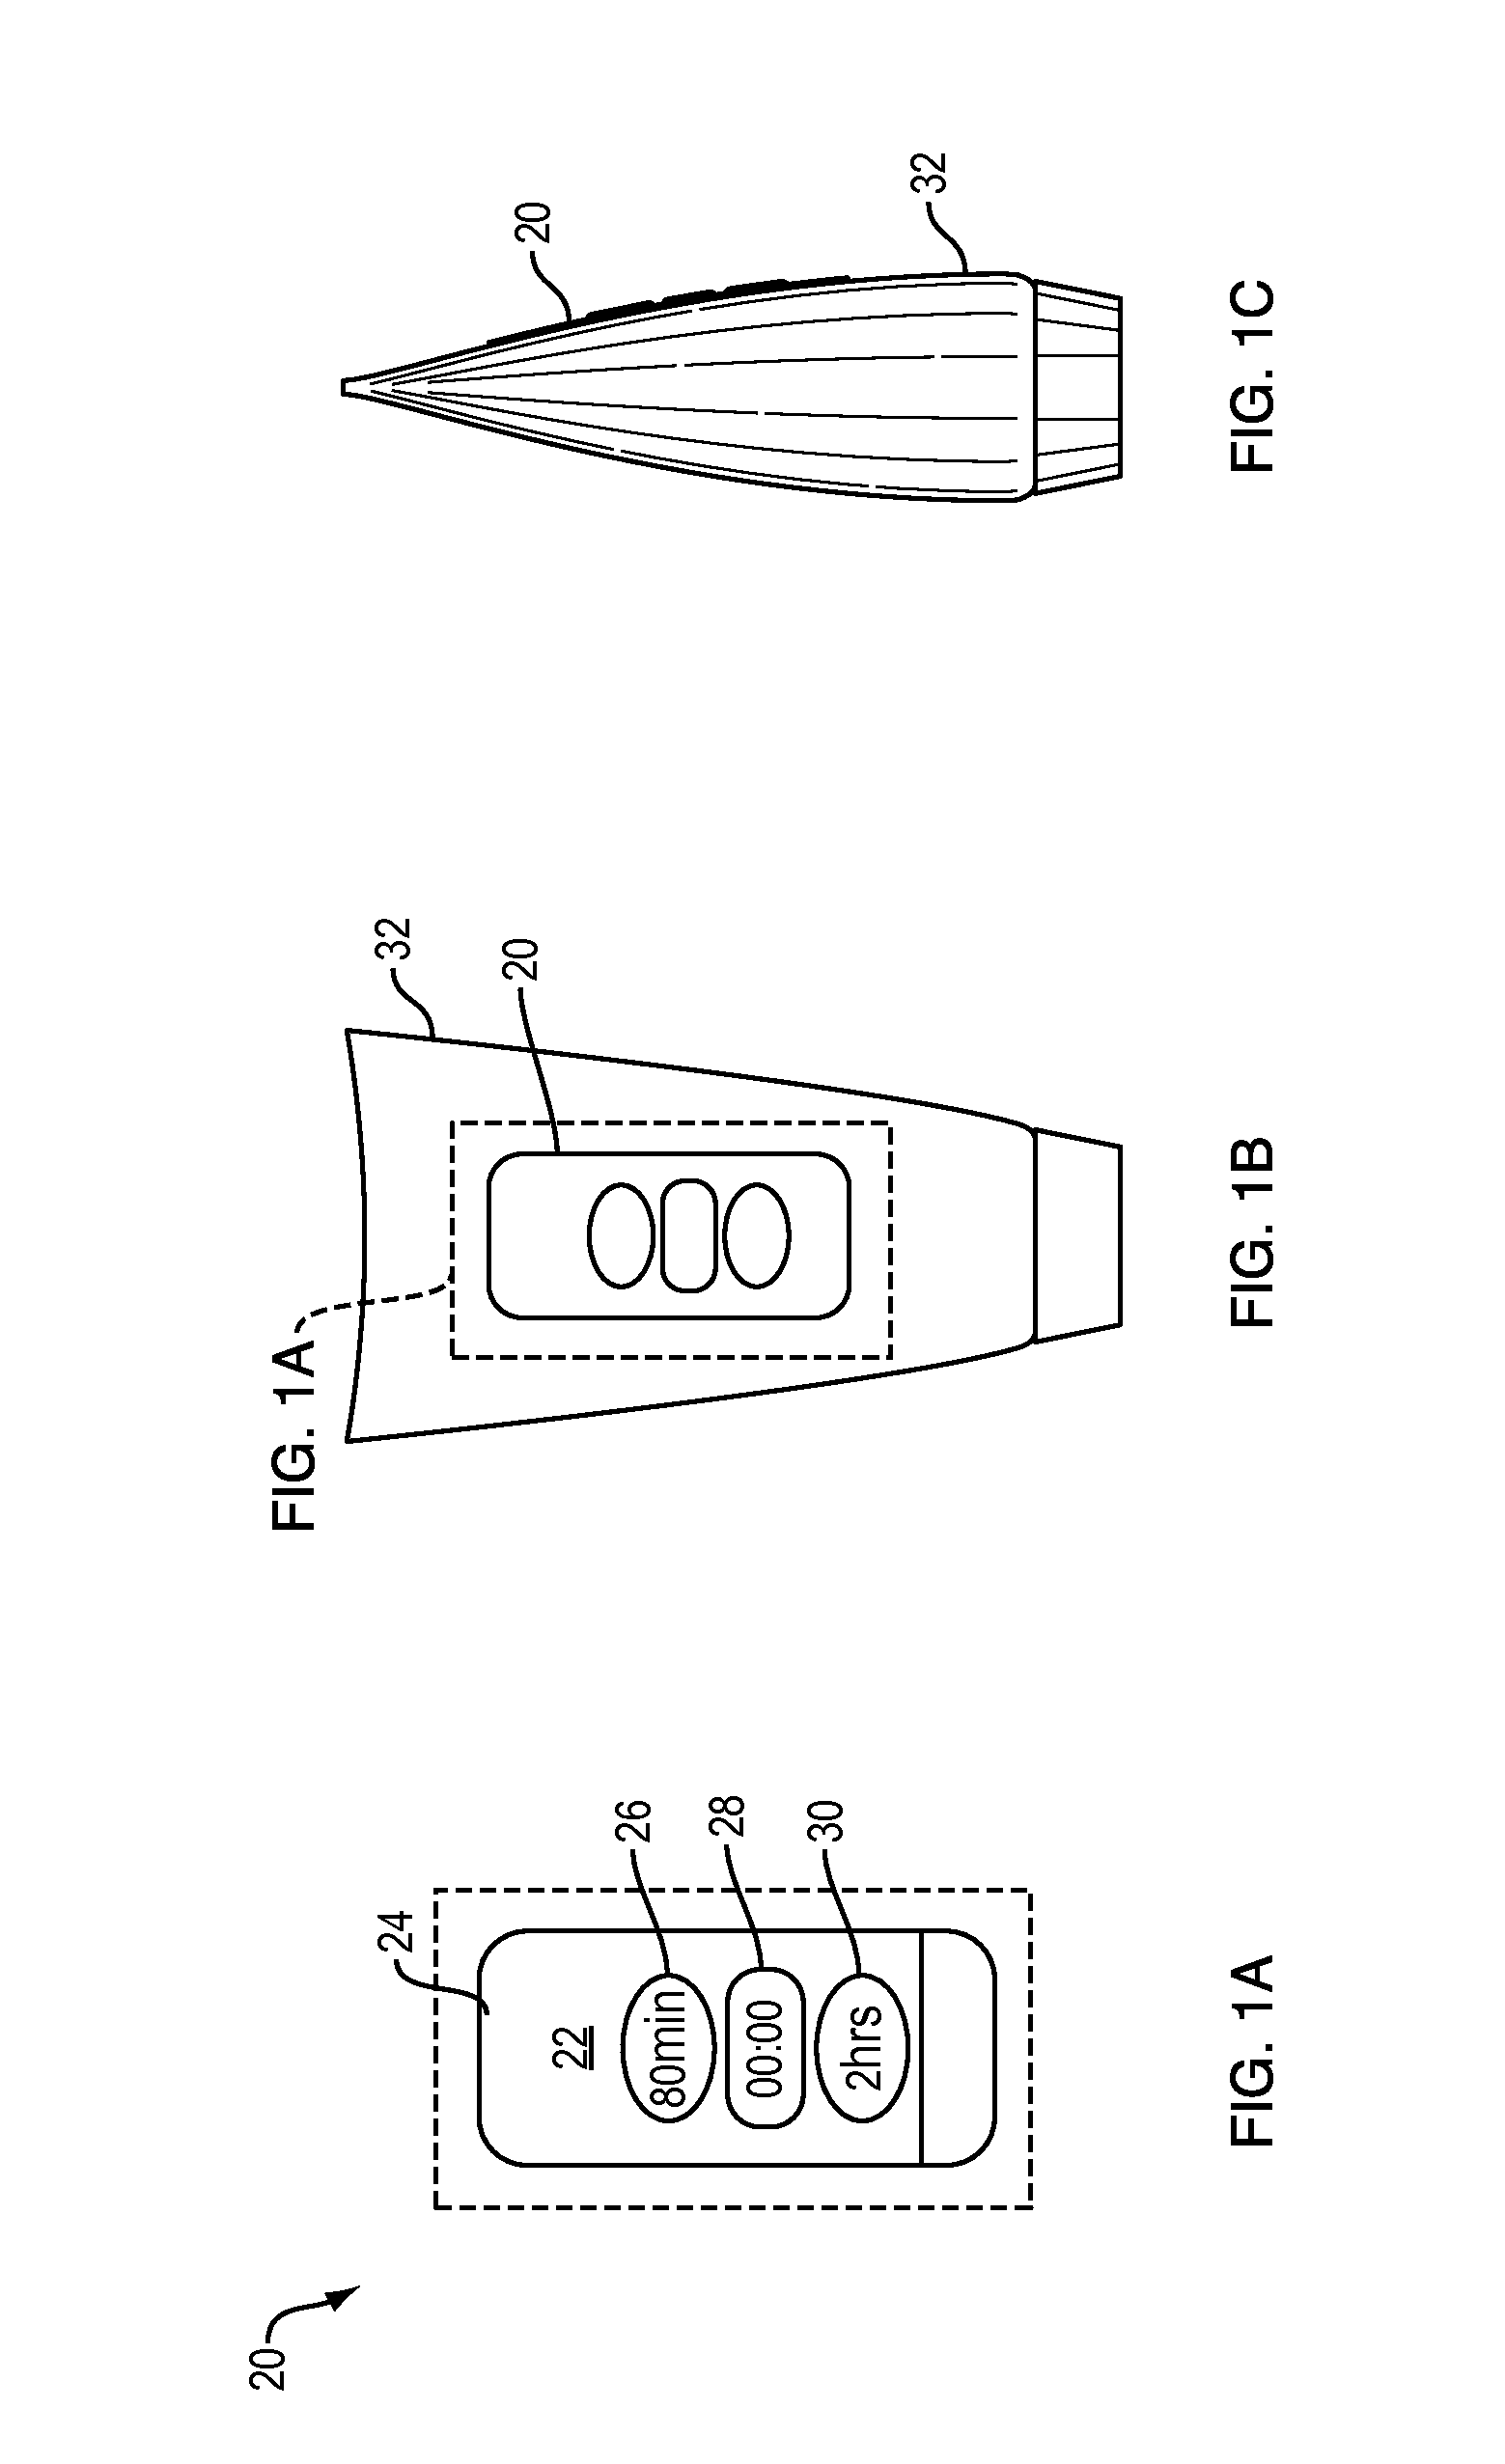 Sunscreen reapplication reminder device and method